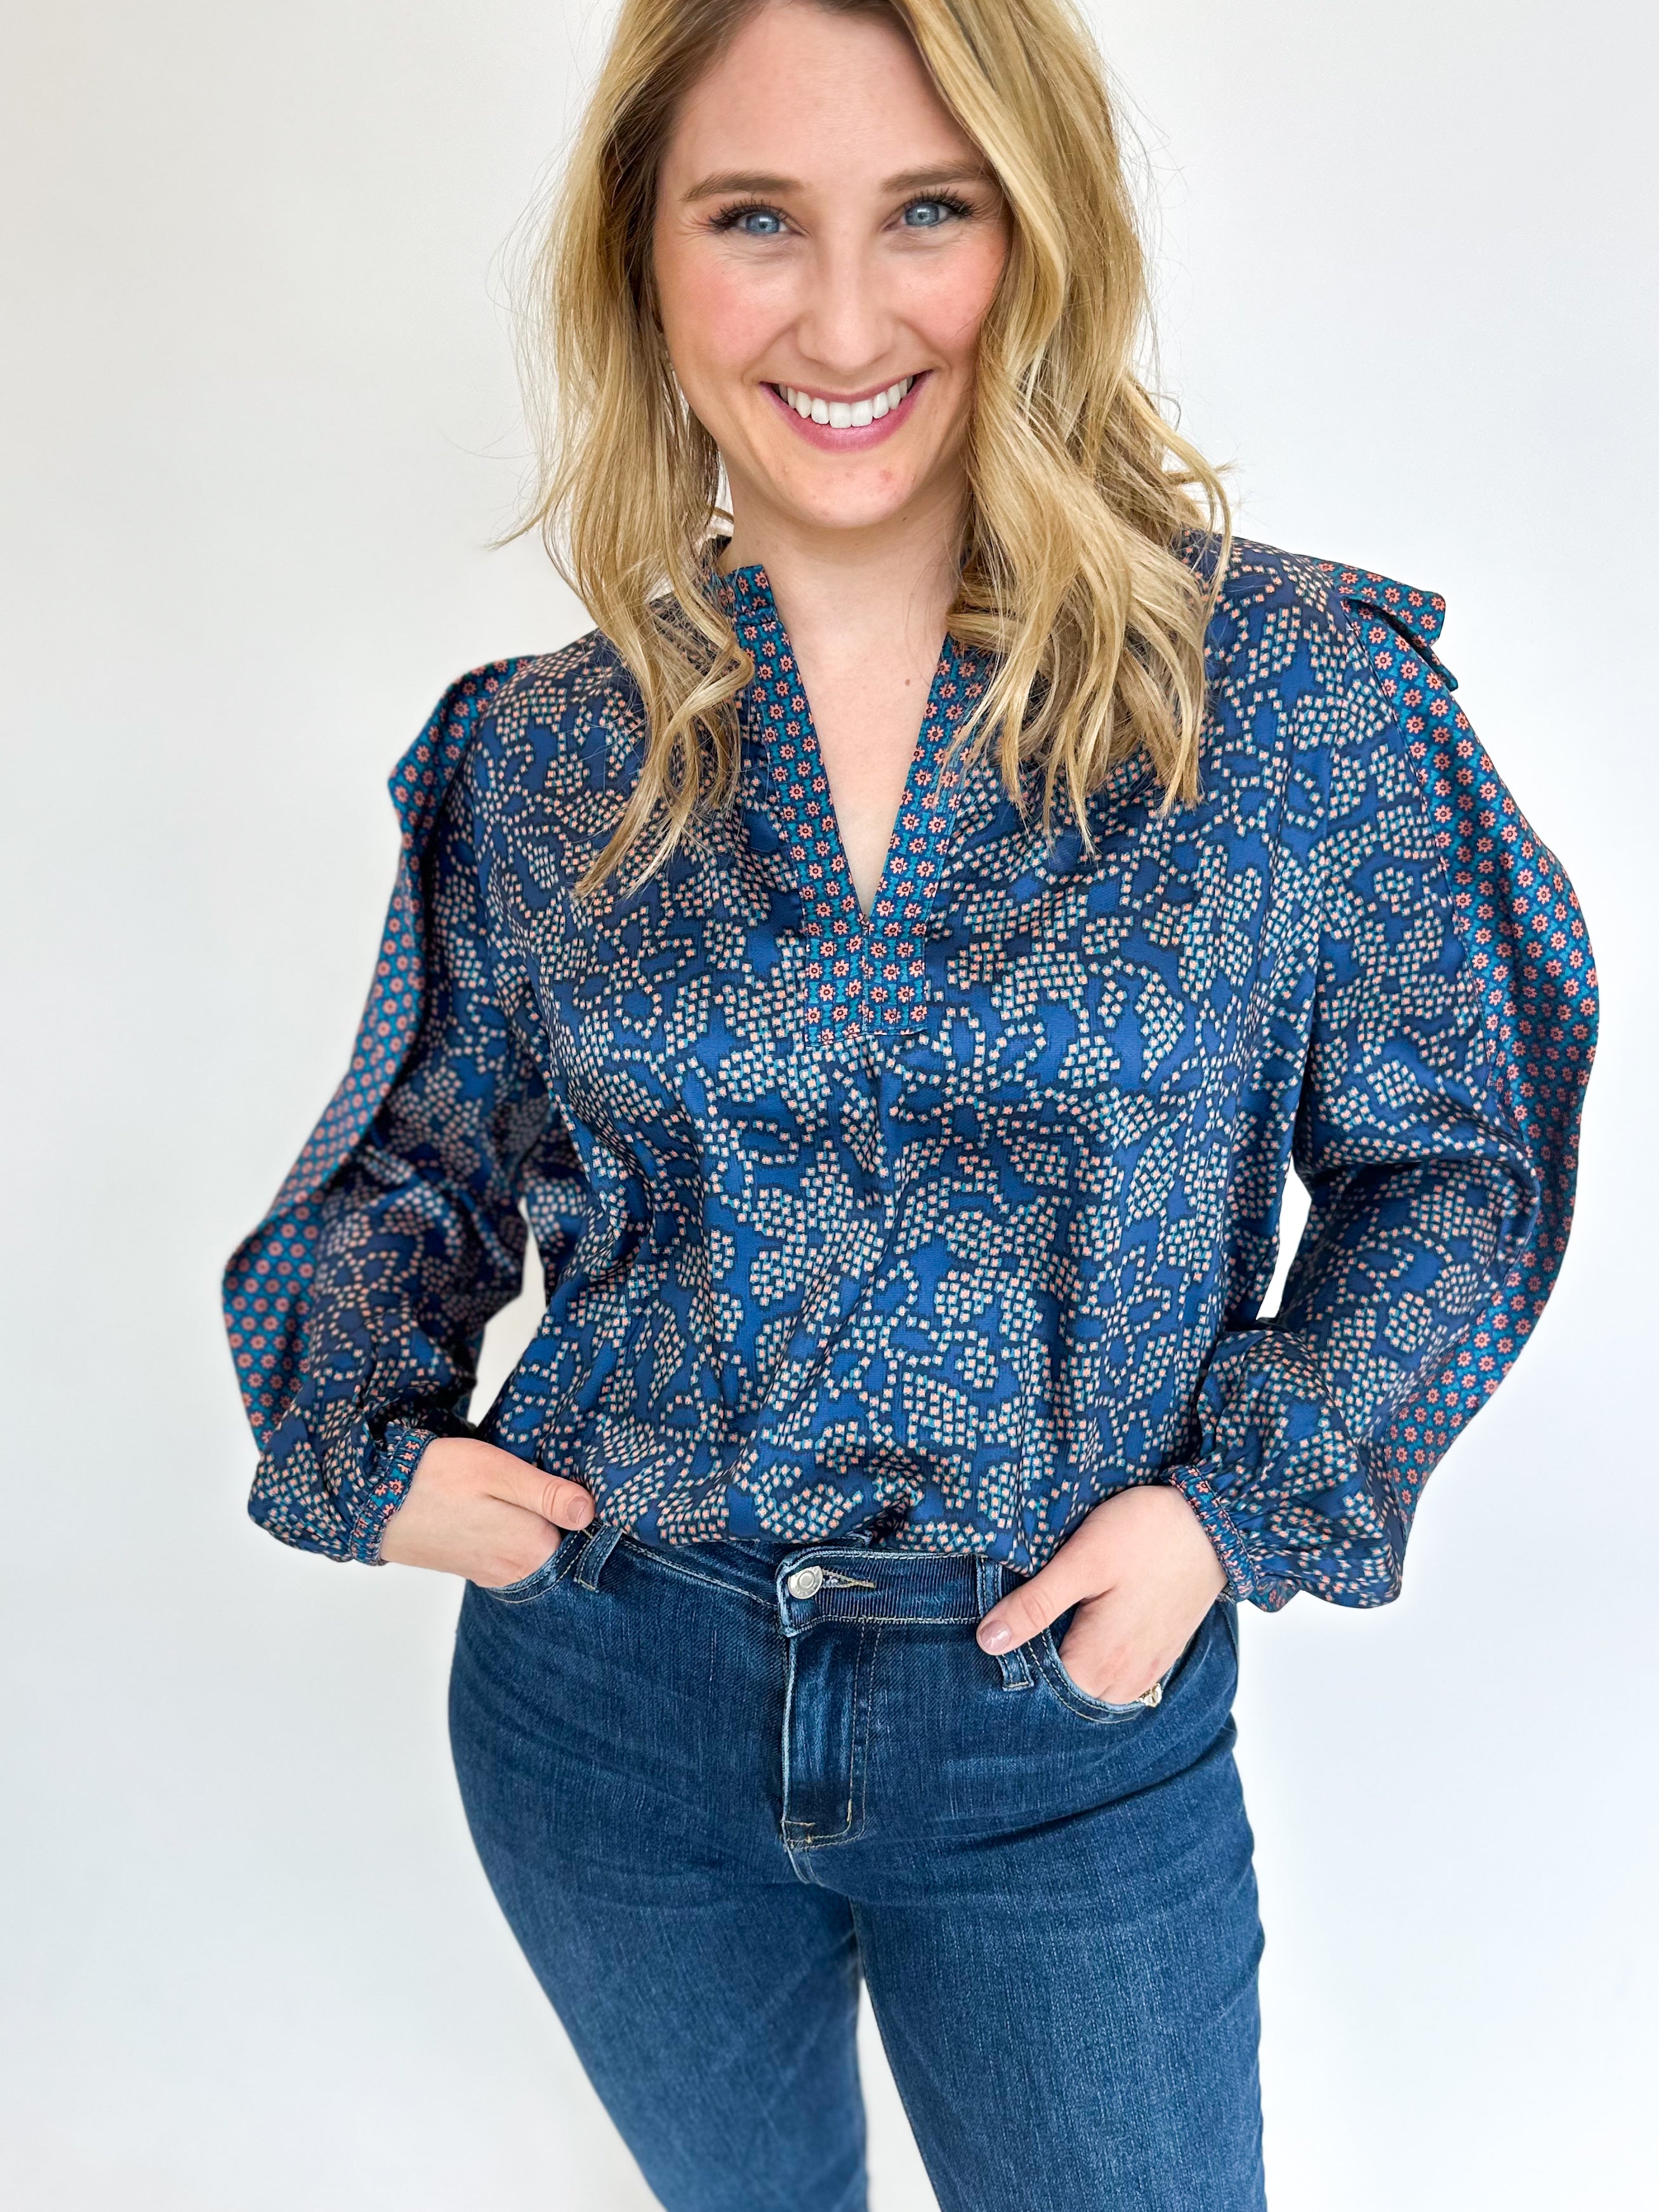 Navy Garden Blouse-200 Fashion Blouses-CURRENT AIR CLOTHING-July & June Women's Fashion Boutique Located in San Antonio, Texas